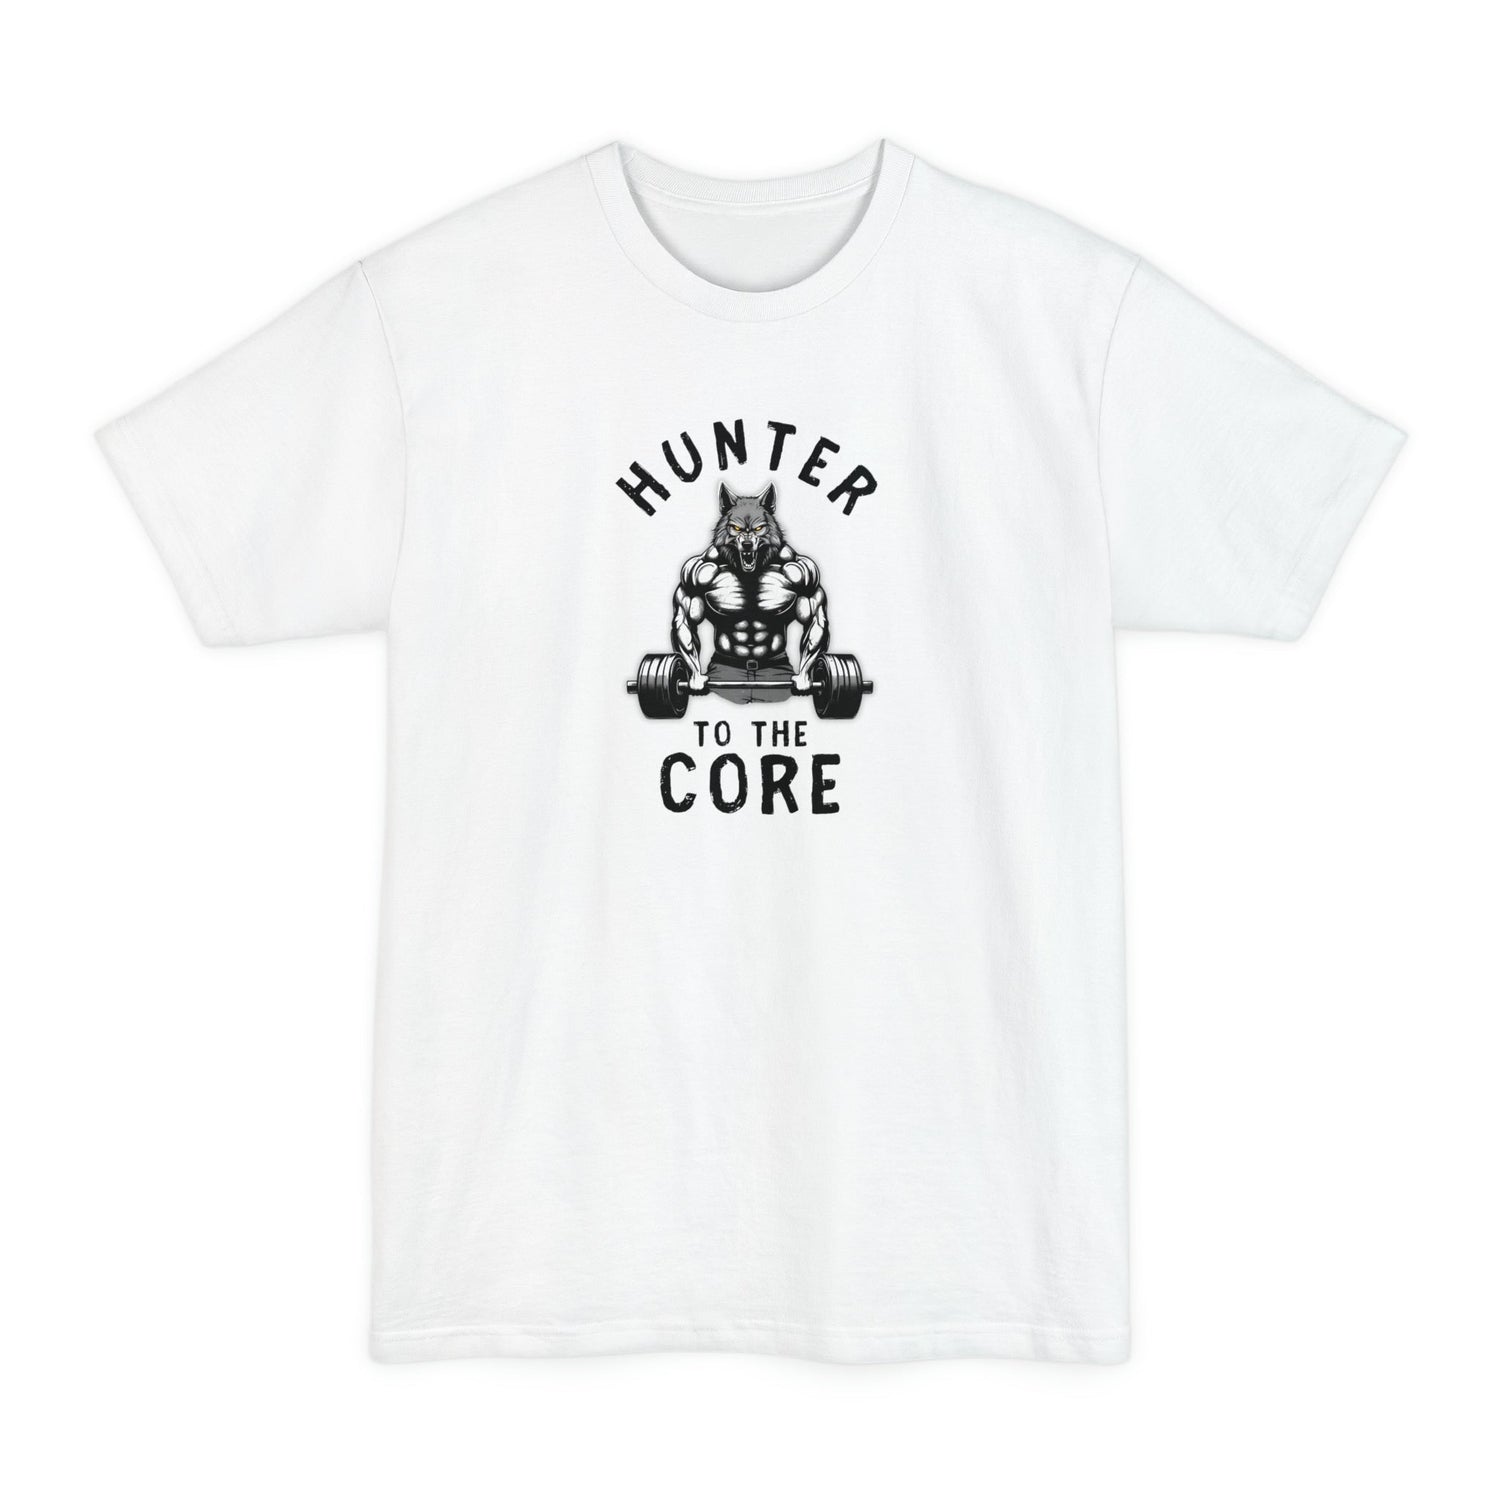 Big and Tall Western Hunting T-Shirt - Hunter to the Core